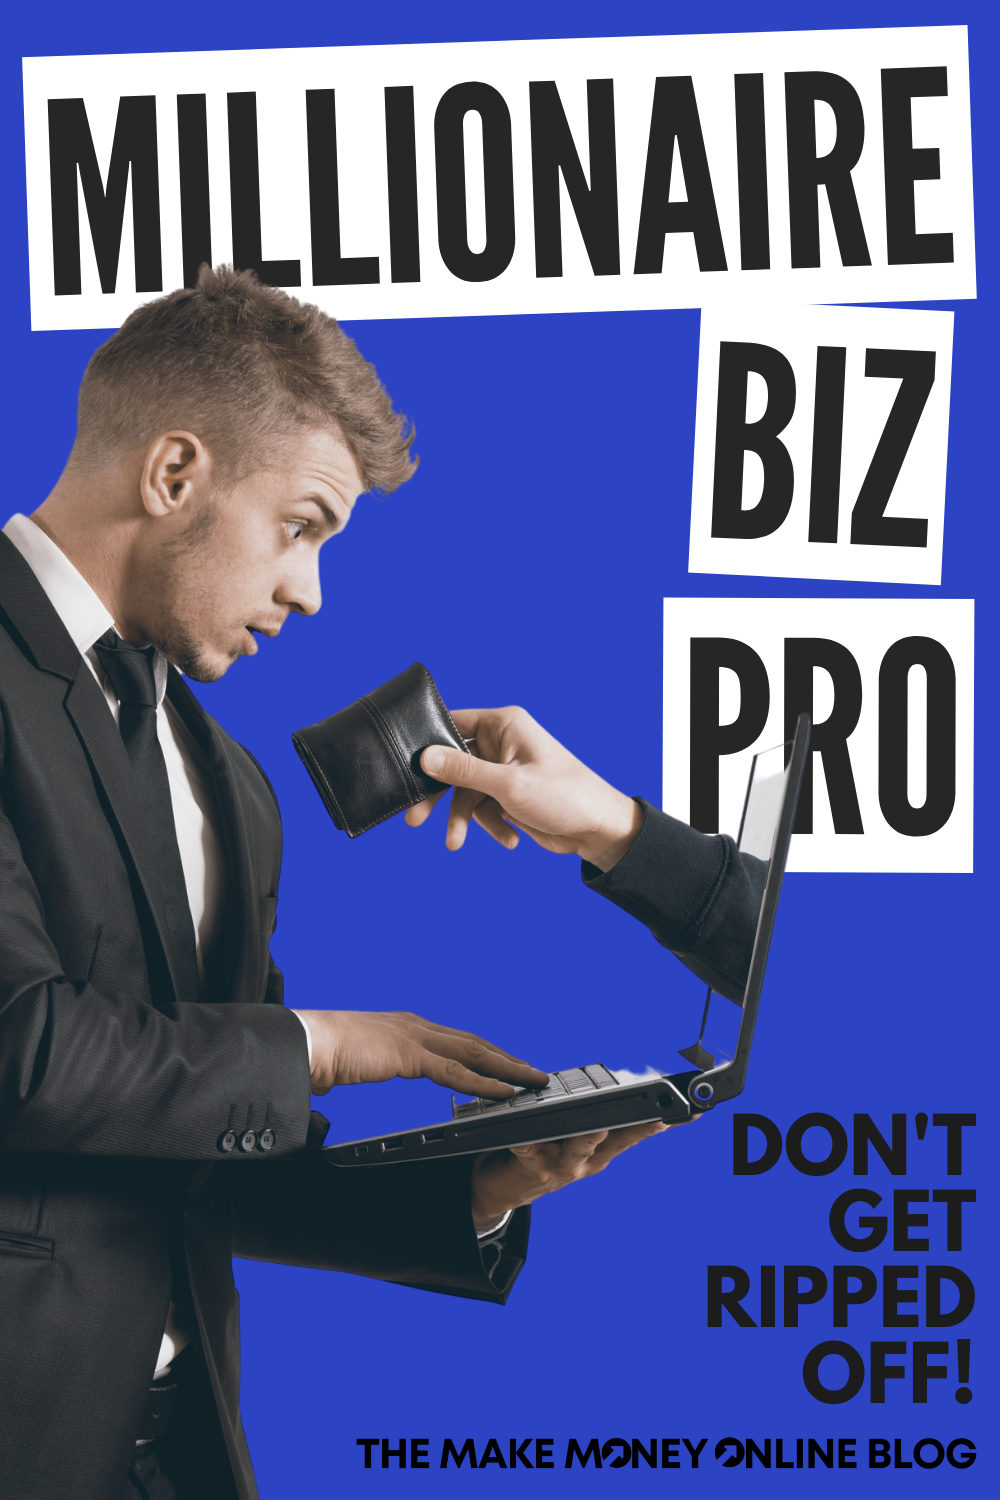 The Millionaire Biz Pro Scam 2022: Don't Get Ripped Off!